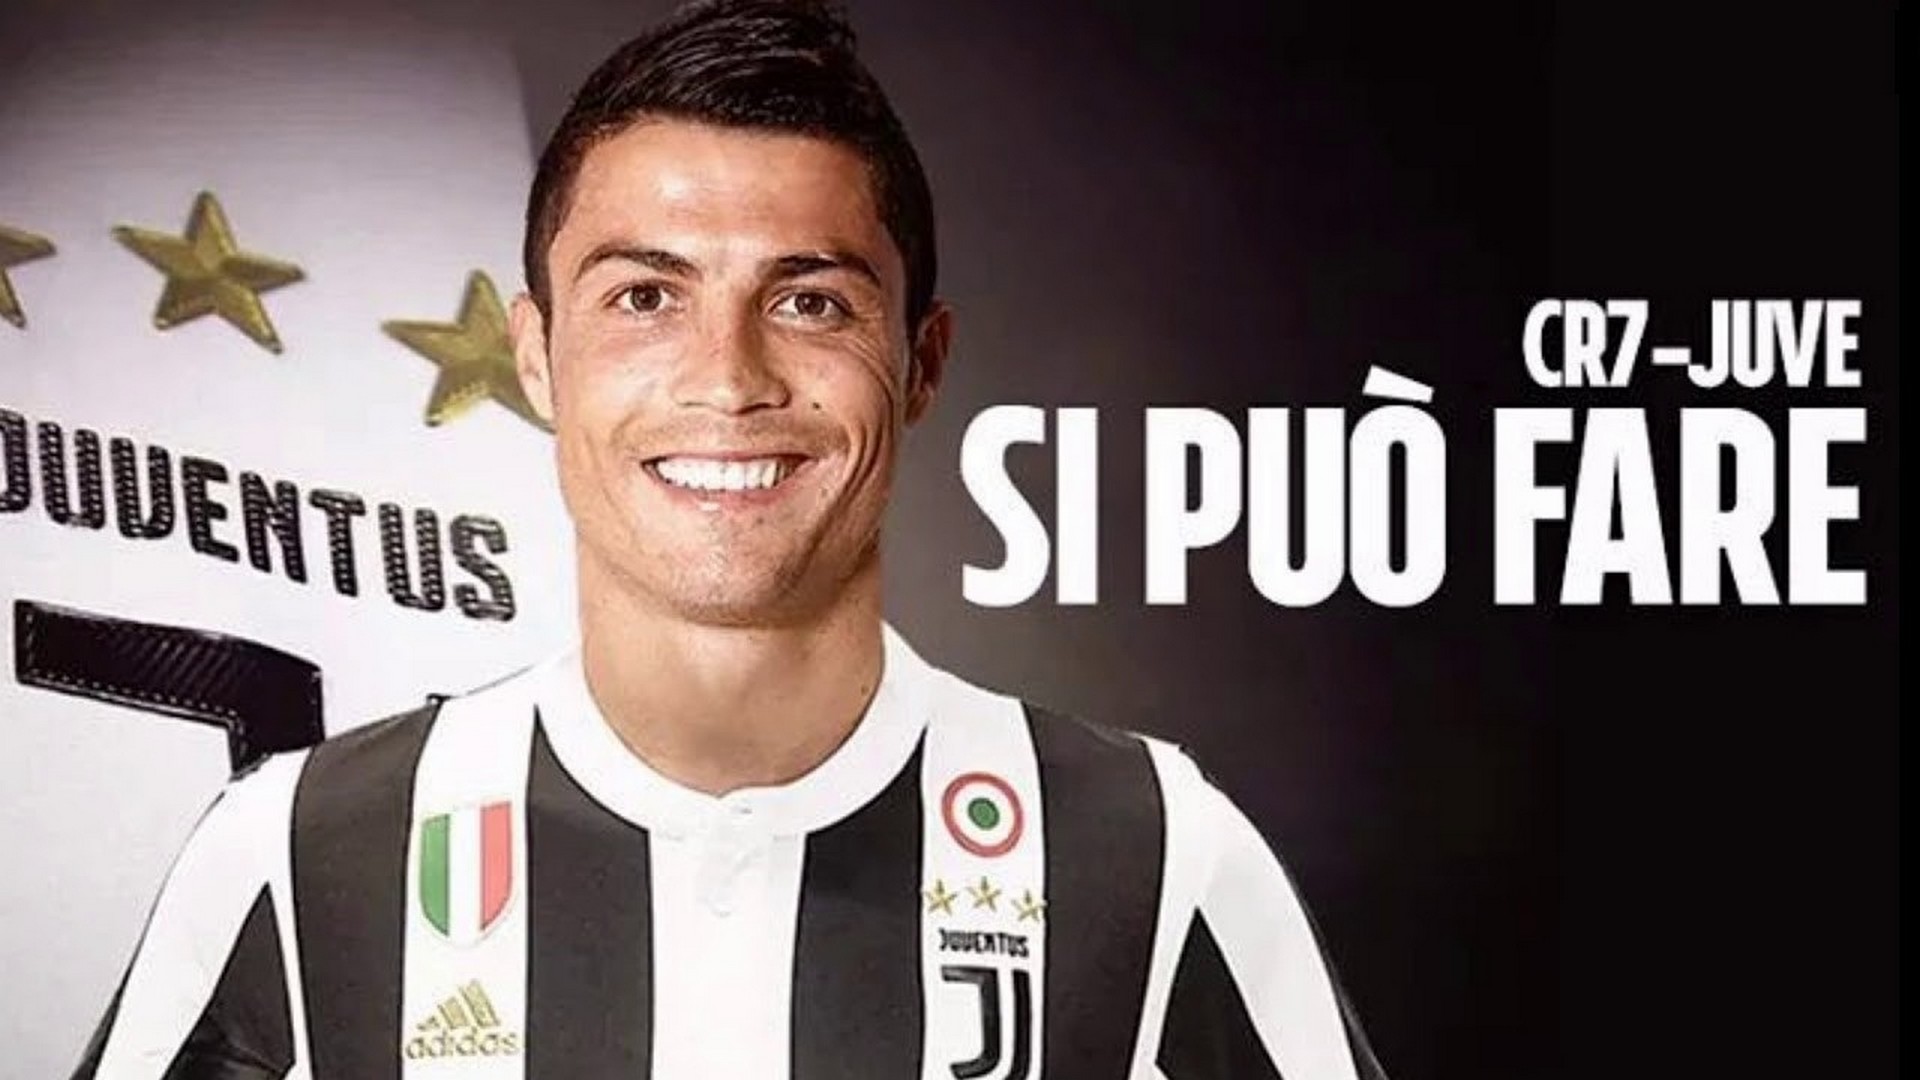 C Ronaldo Juventus Desktop Backgrounds with image resolution 1920x1080 pixel. You can make this wallpaper for your Desktop Computer Backgrounds, Mac Wallpapers, Android Lock screen or iPhone Screensavers